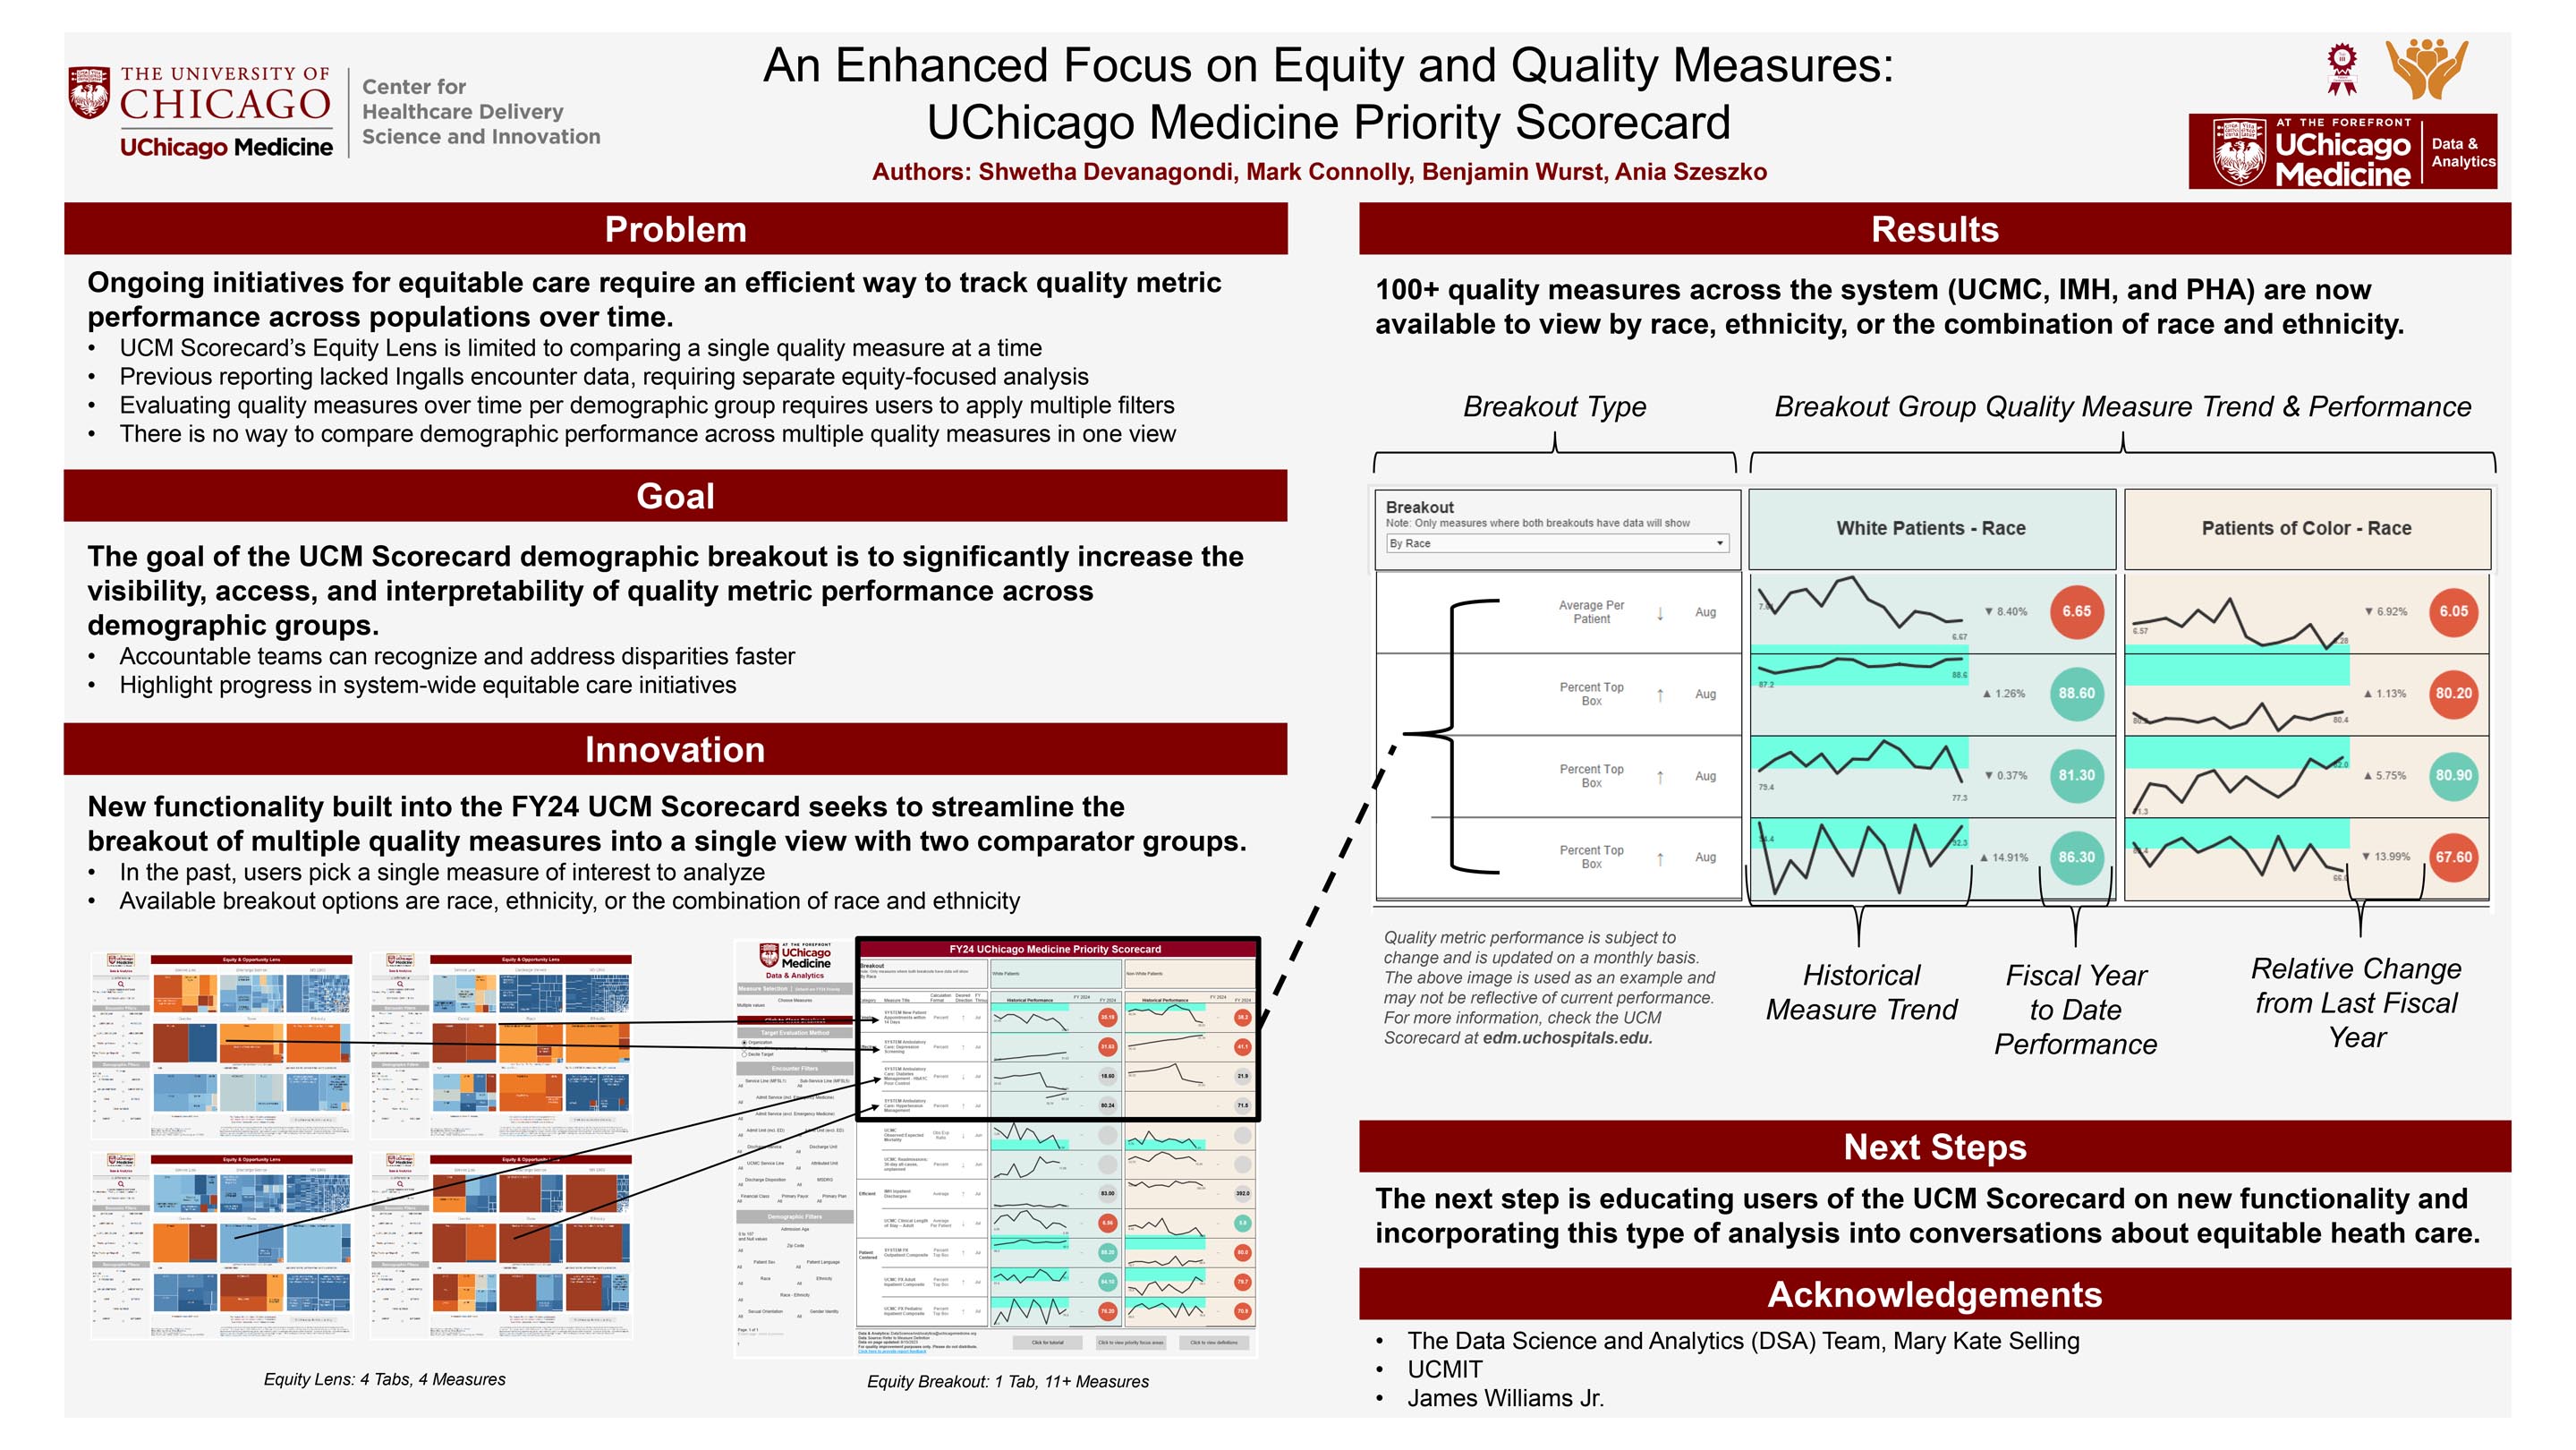 WURST_An Enhanced Focus on Equity and Quality Measures- UChicago Medicine Priority Scorecard